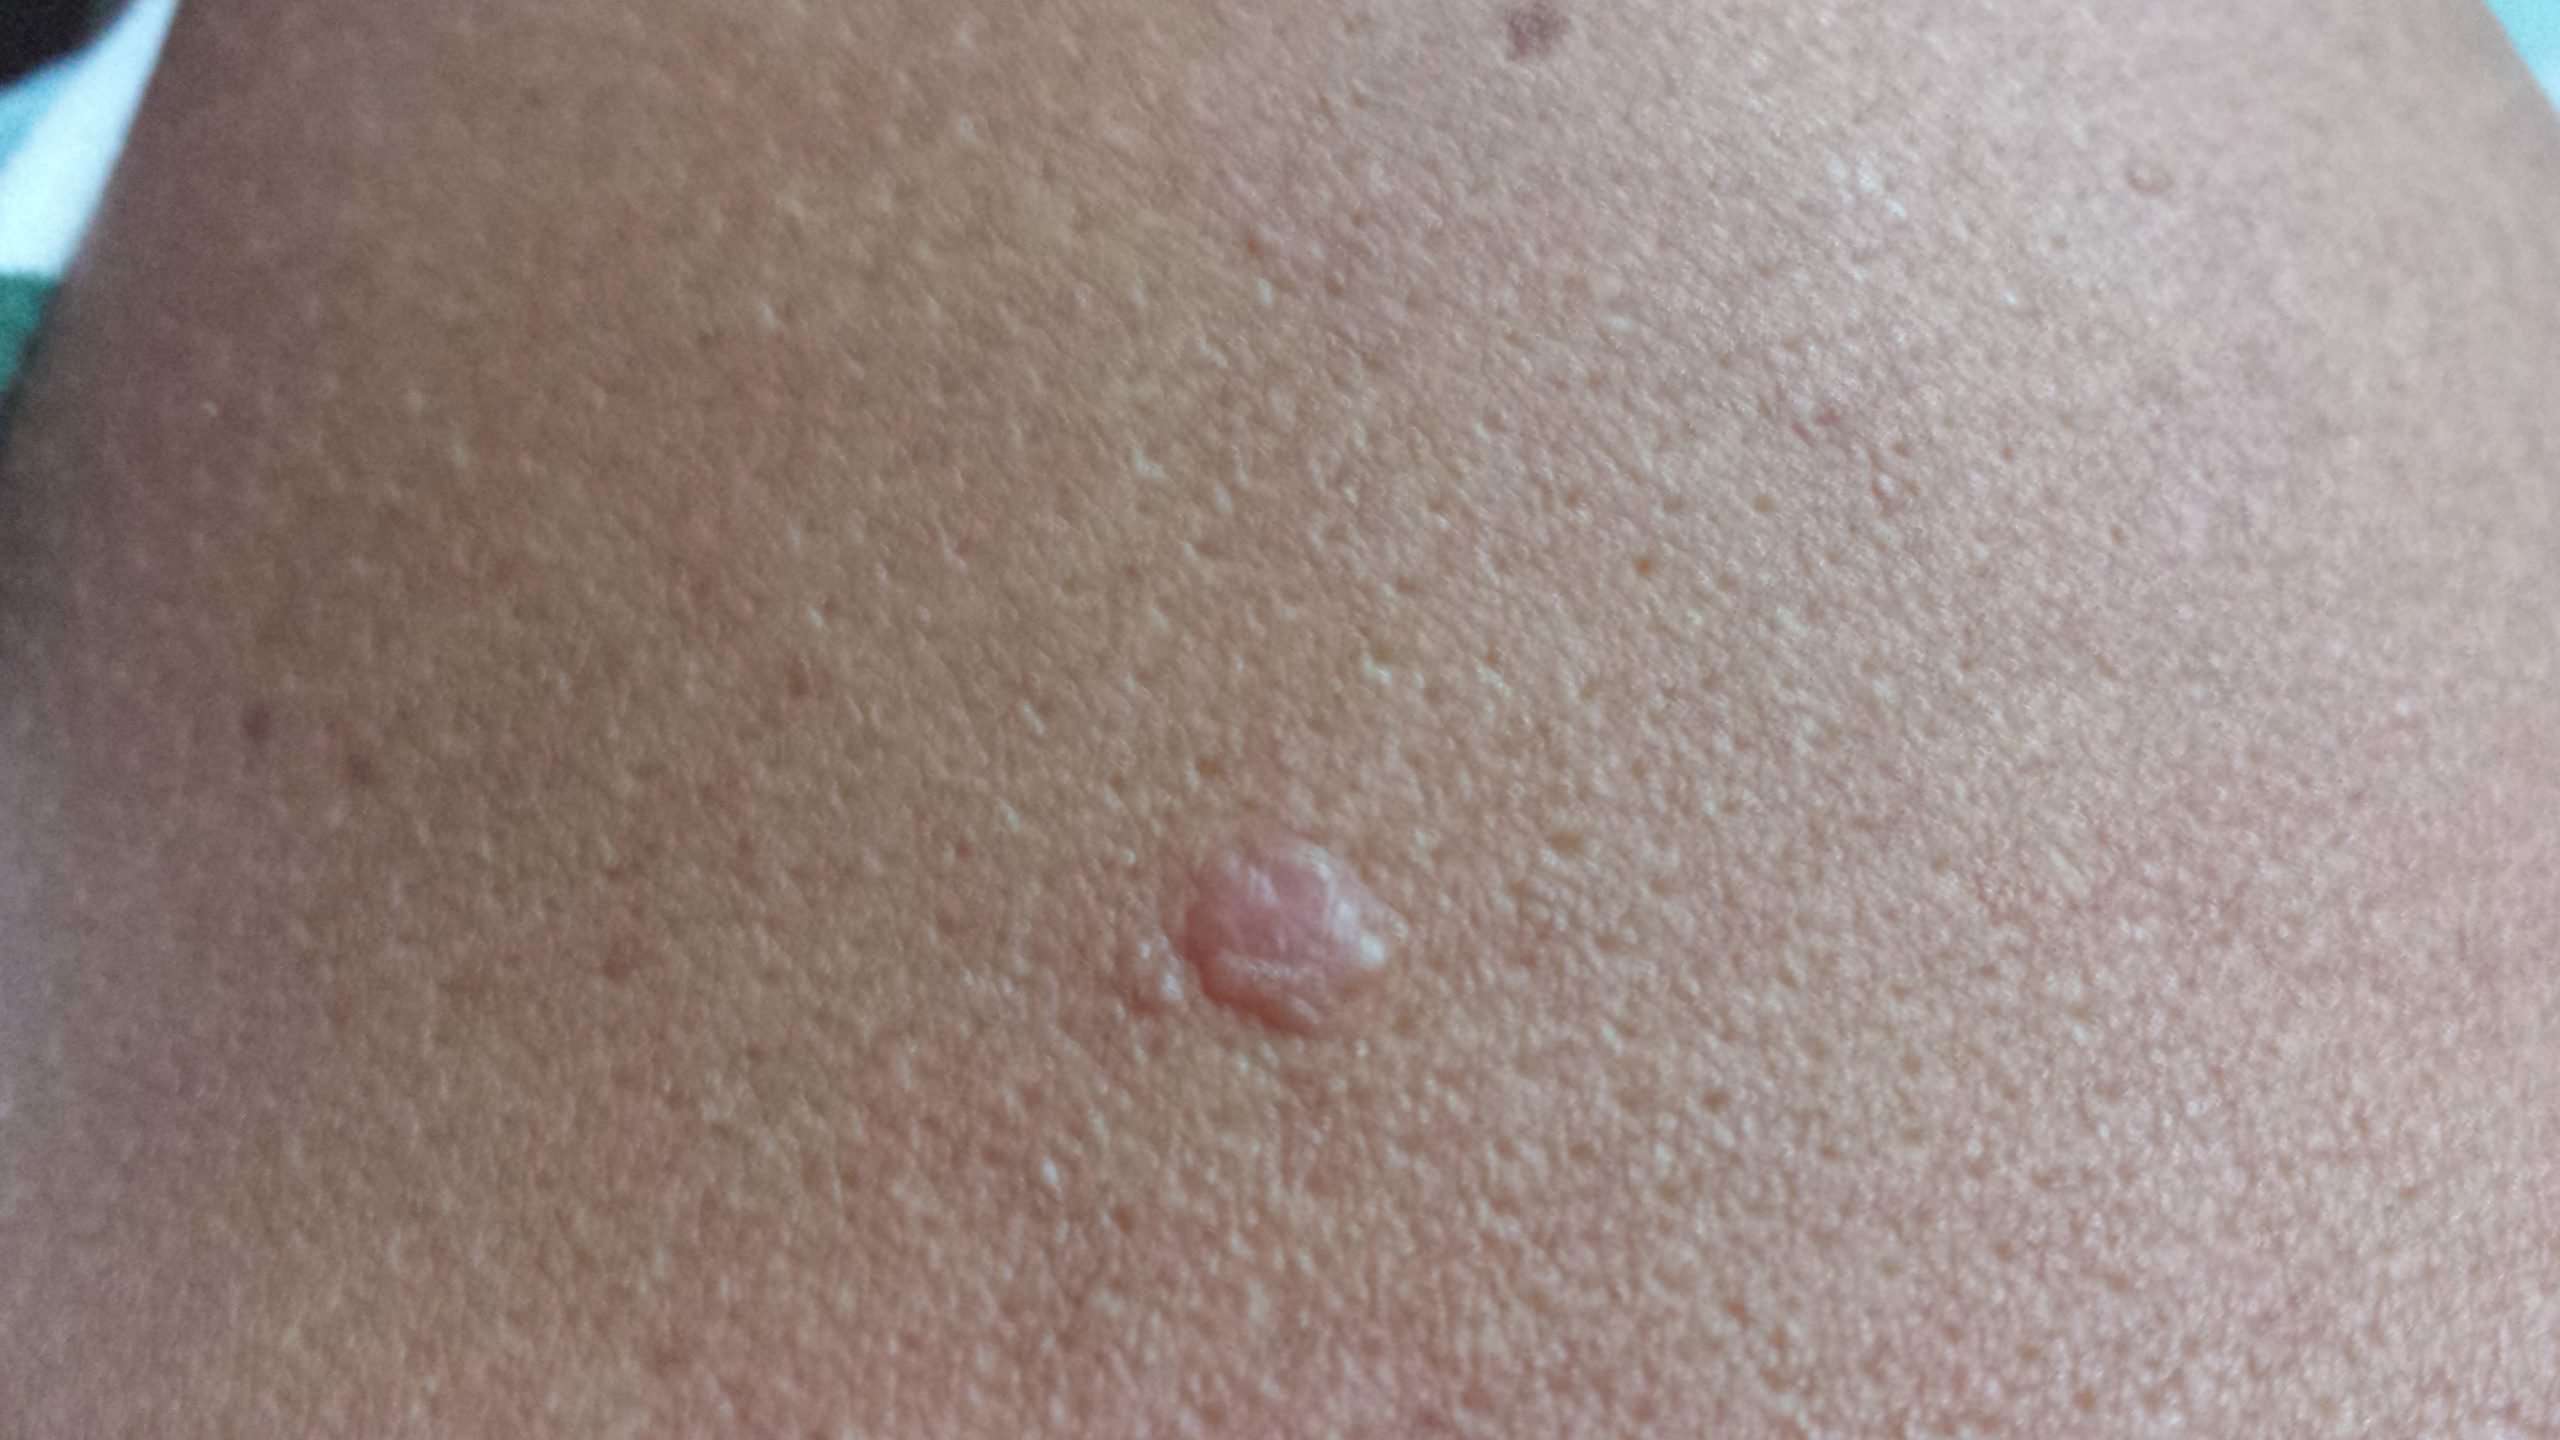 How can I tell if this is skin cancer?